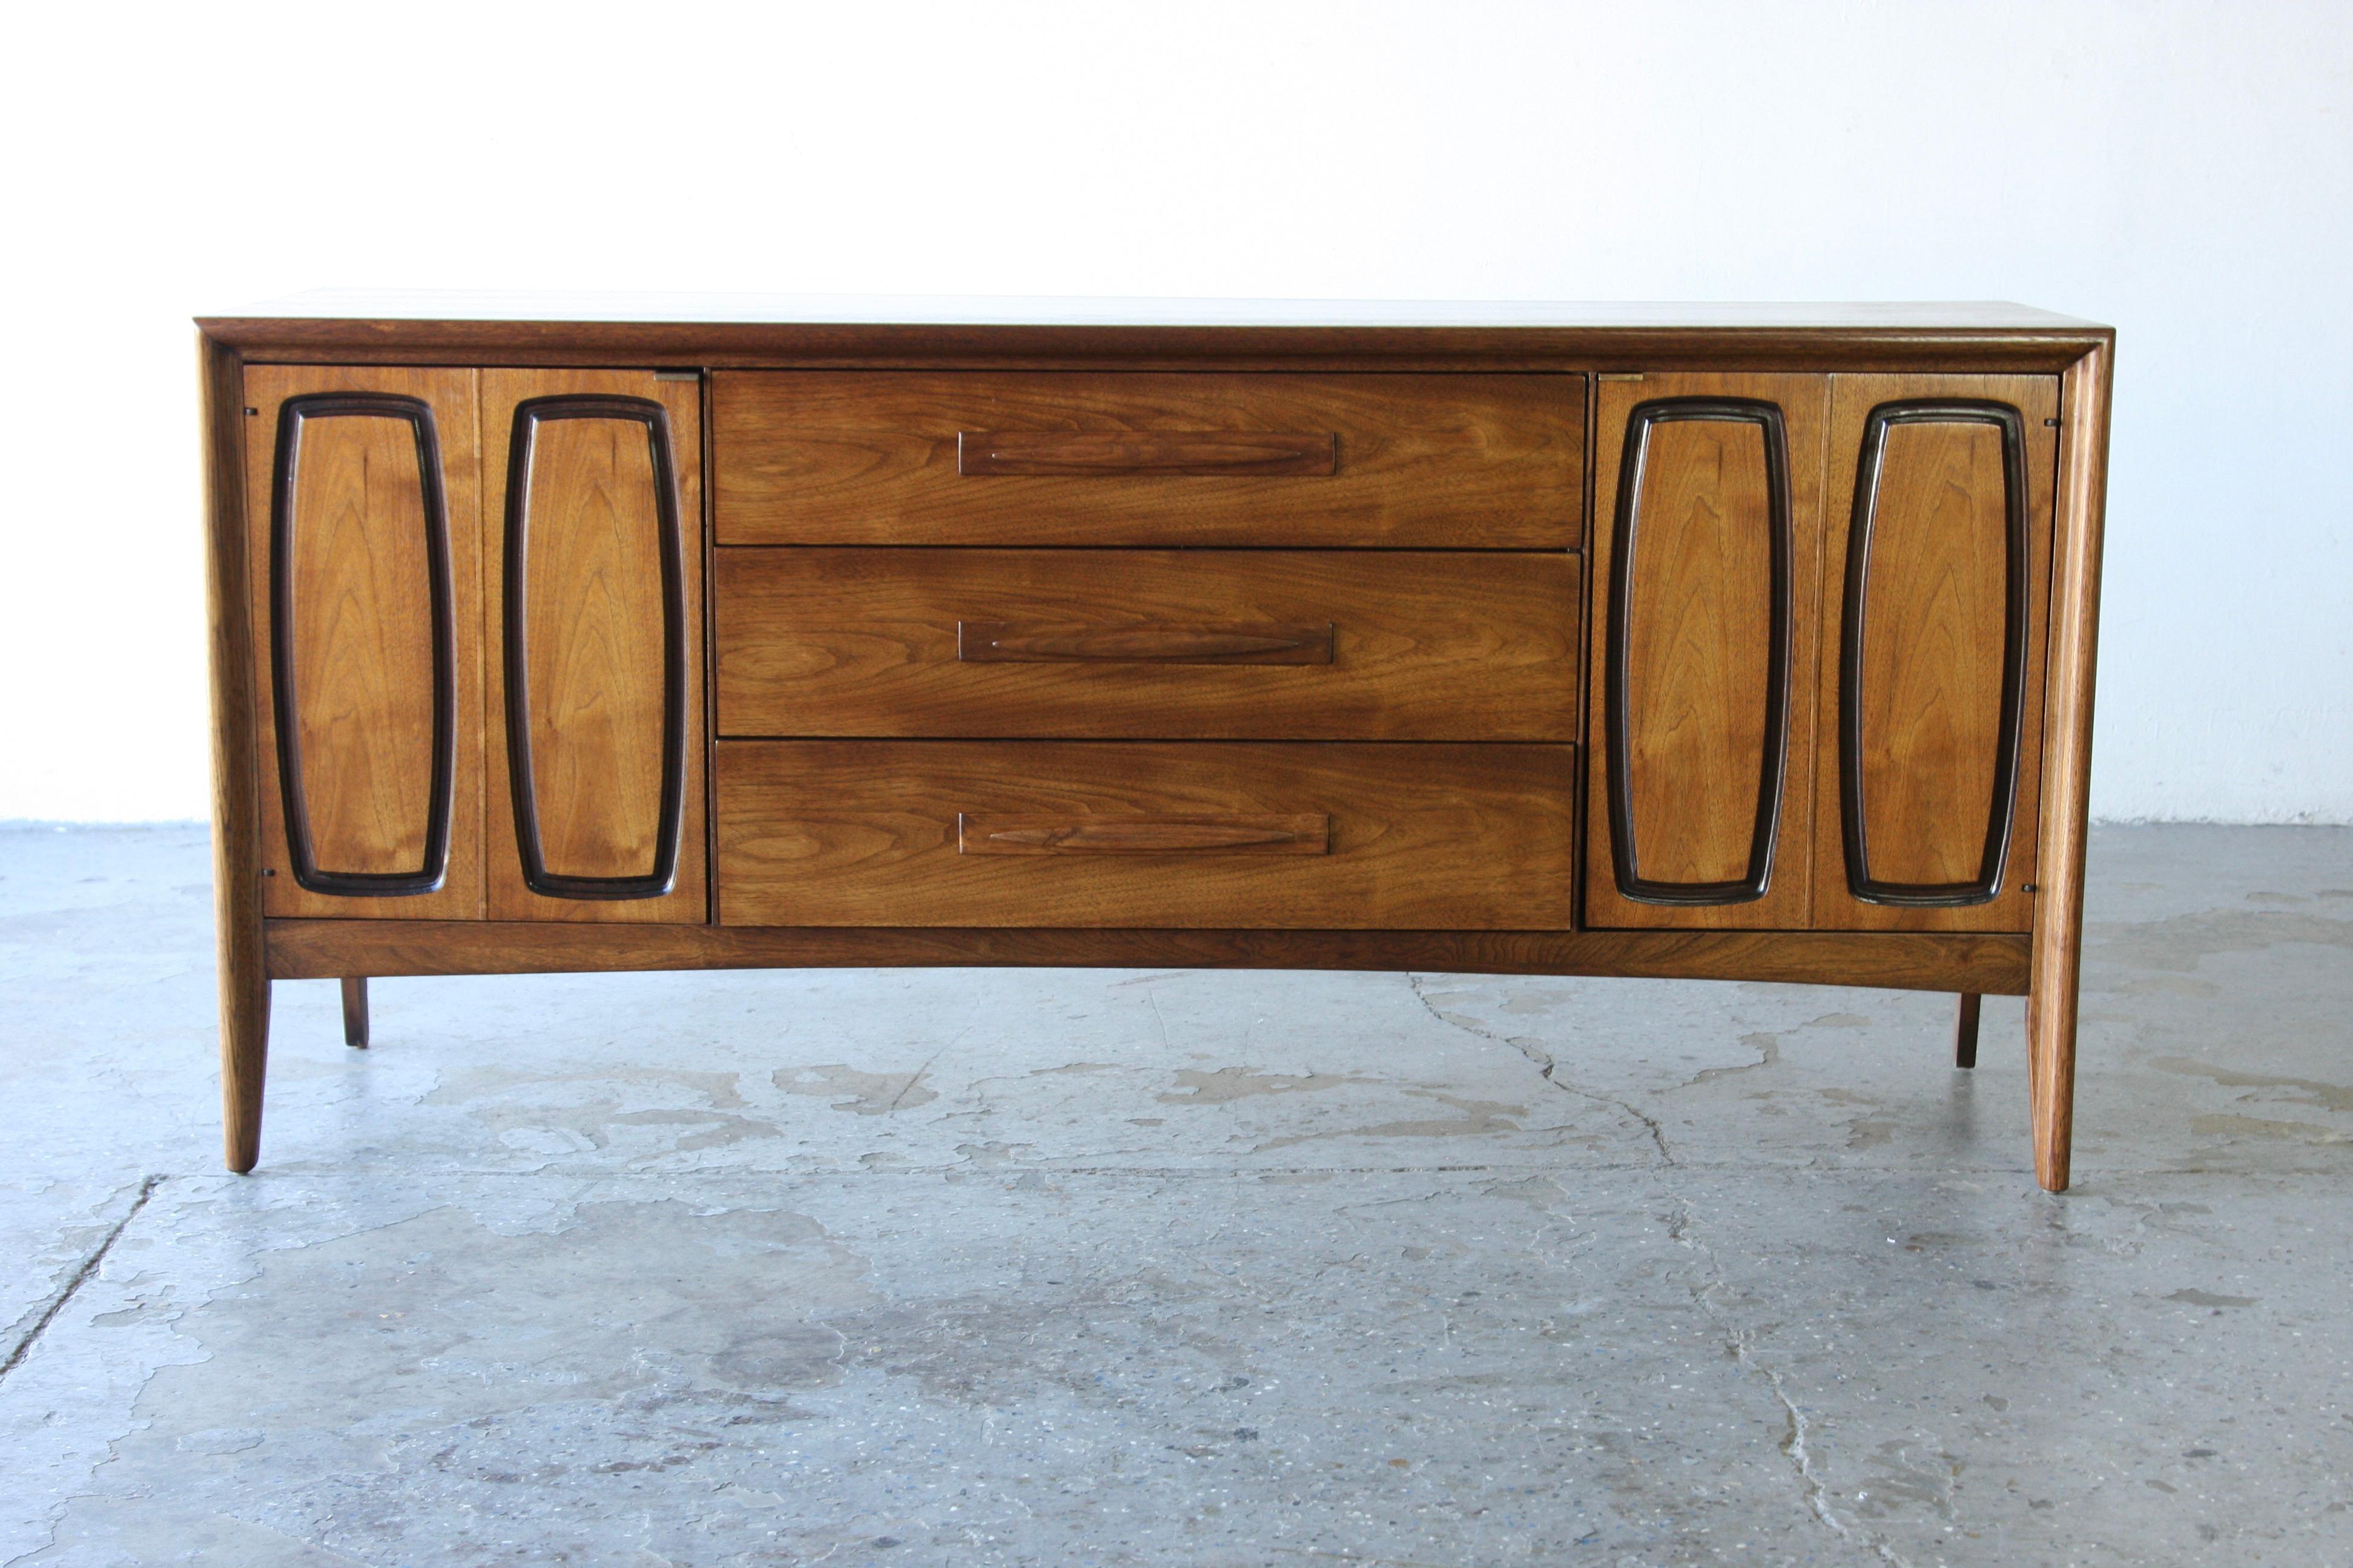 Broyhill Emphasis Credenza
A mid-century modern classic - the Broyhill Emphasis walnut 66